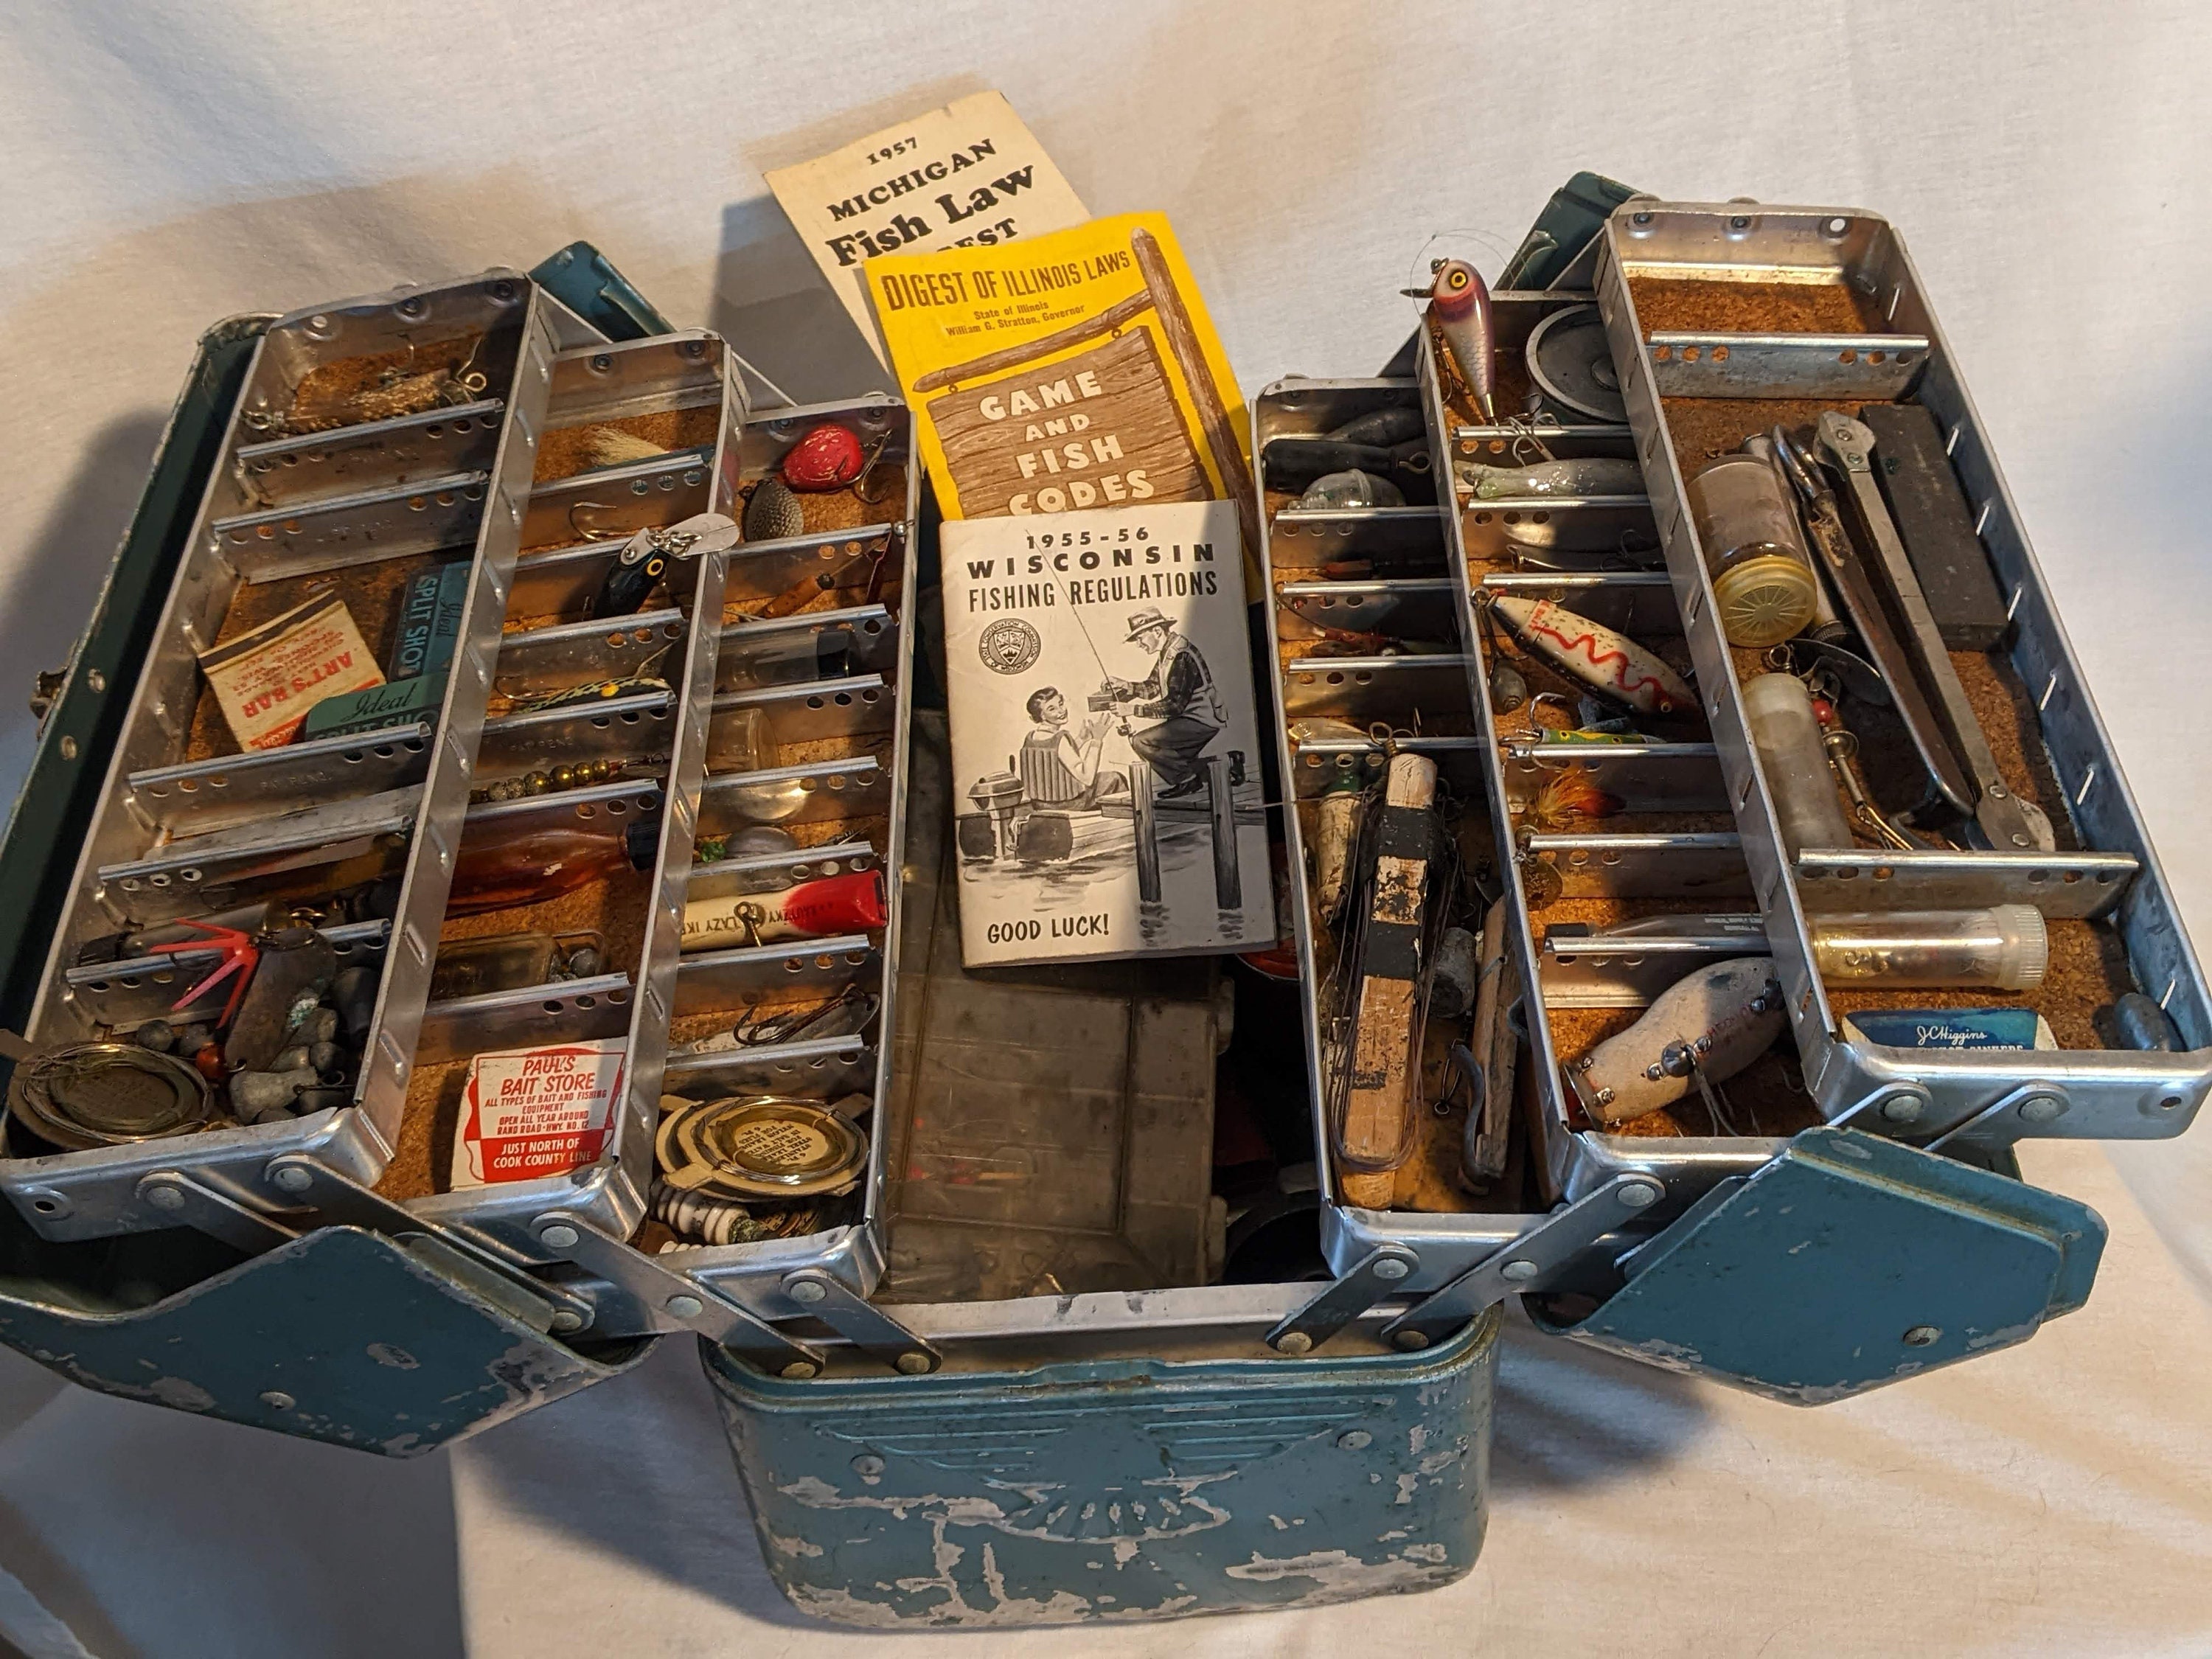 Vintage Tackle Box Full of Lures and Miscellaneous Items From 1956